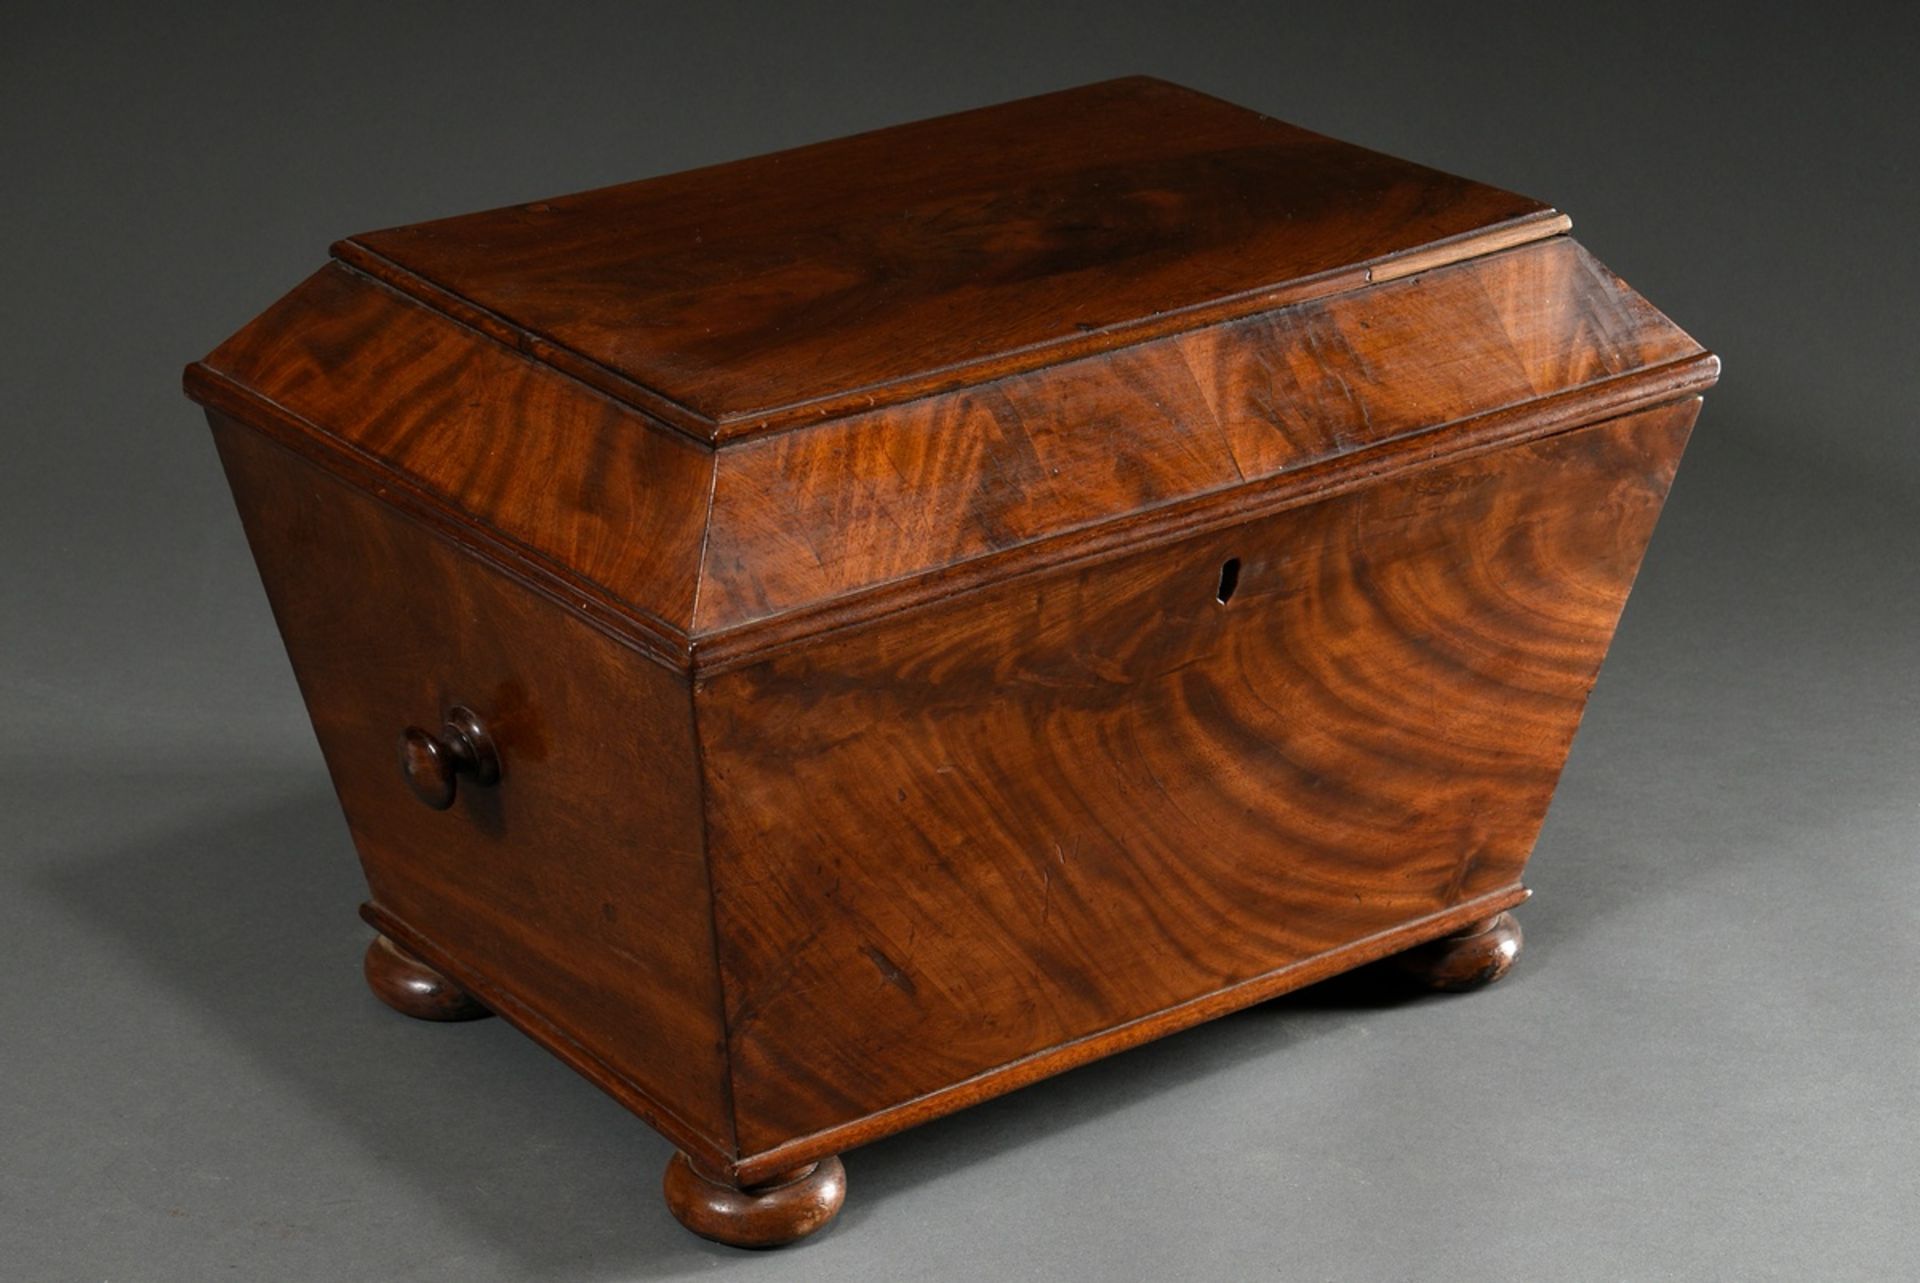 Large mahogany box in the shape of a sarcophagus with carrying knobs on the sides, compartmentalisa